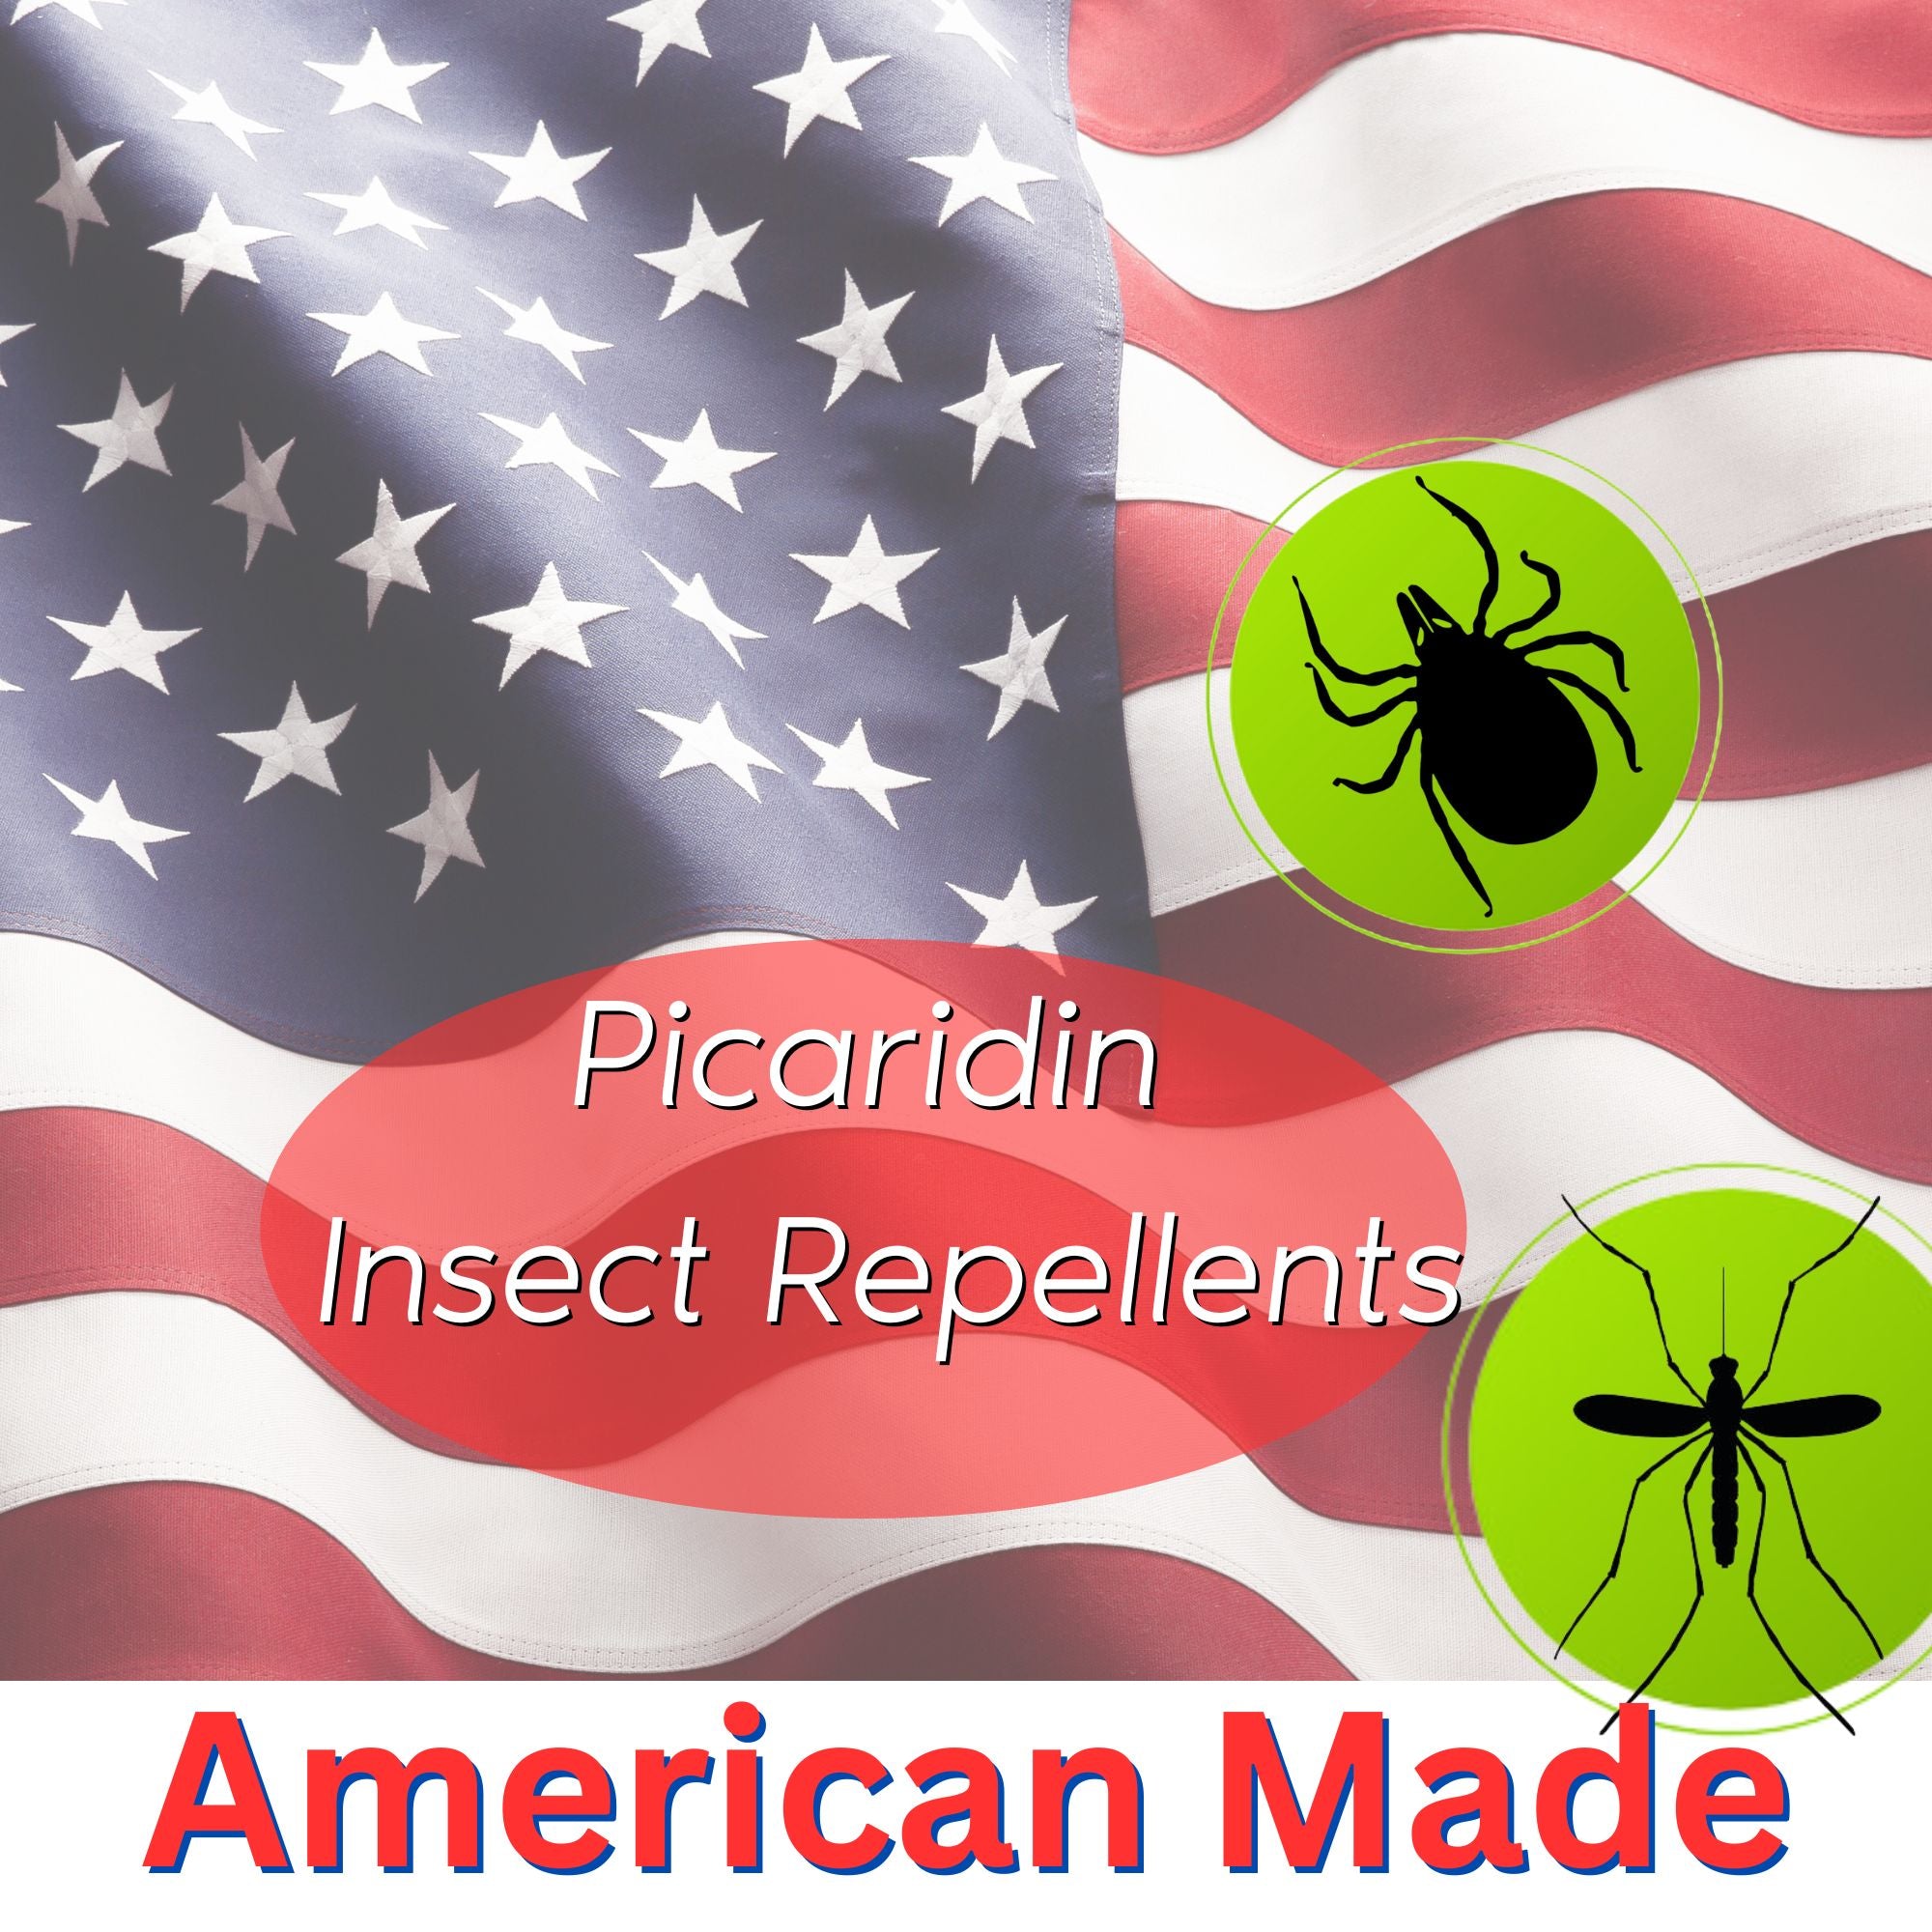 Insect Repellent, Unscented Picaridin, Refill